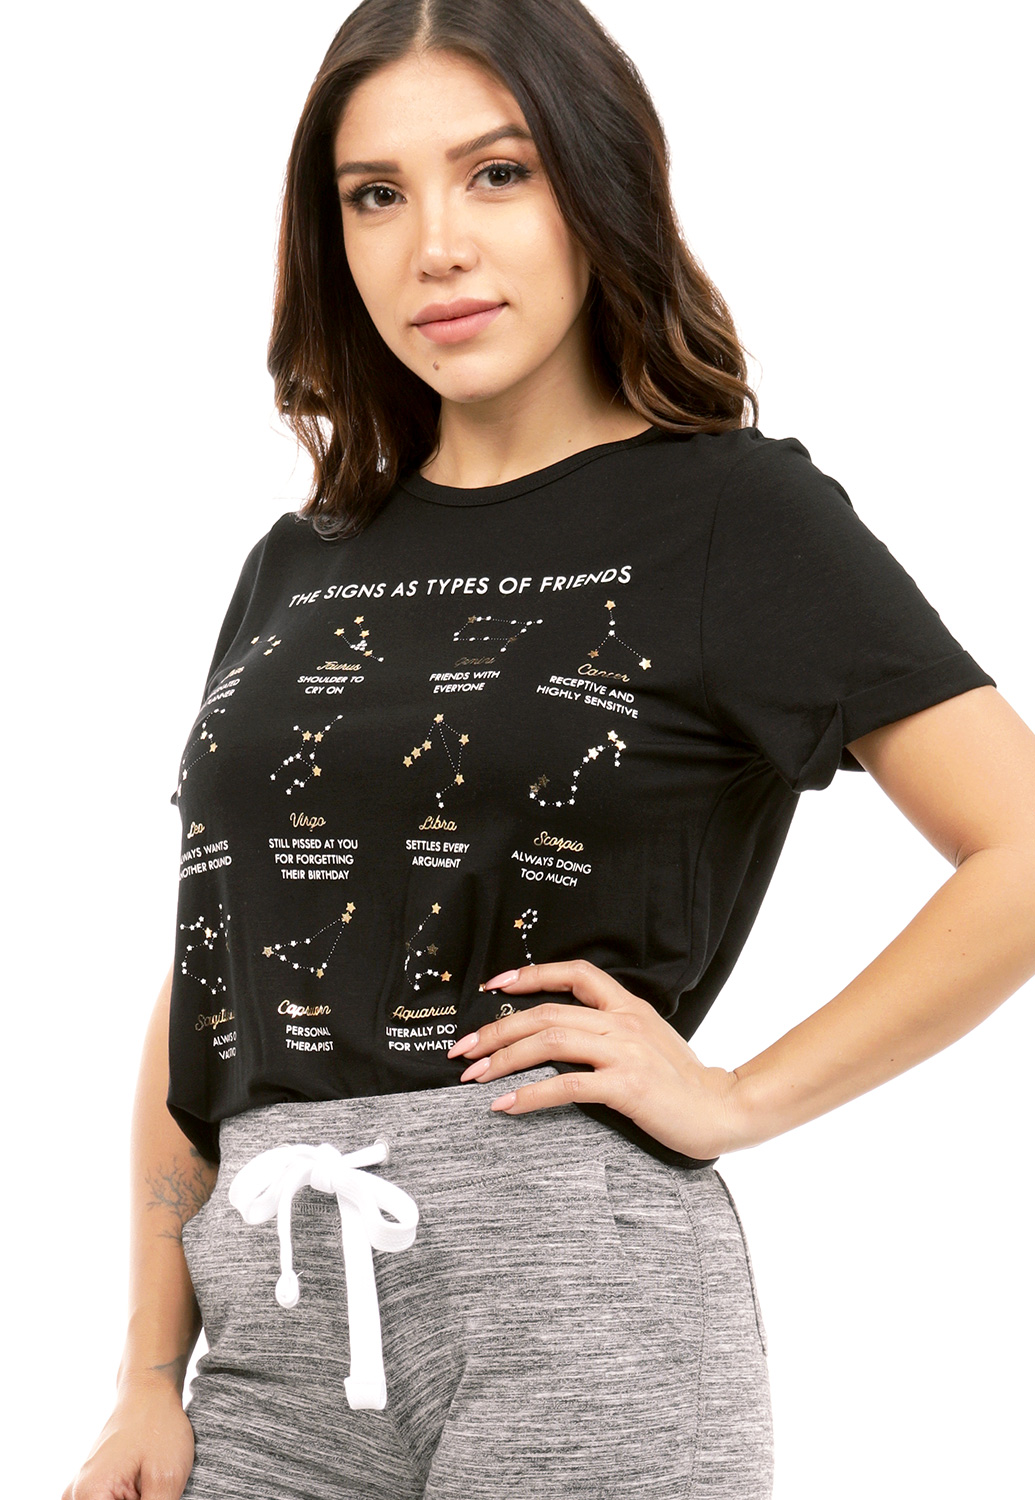 Horoscope Signs Print Top